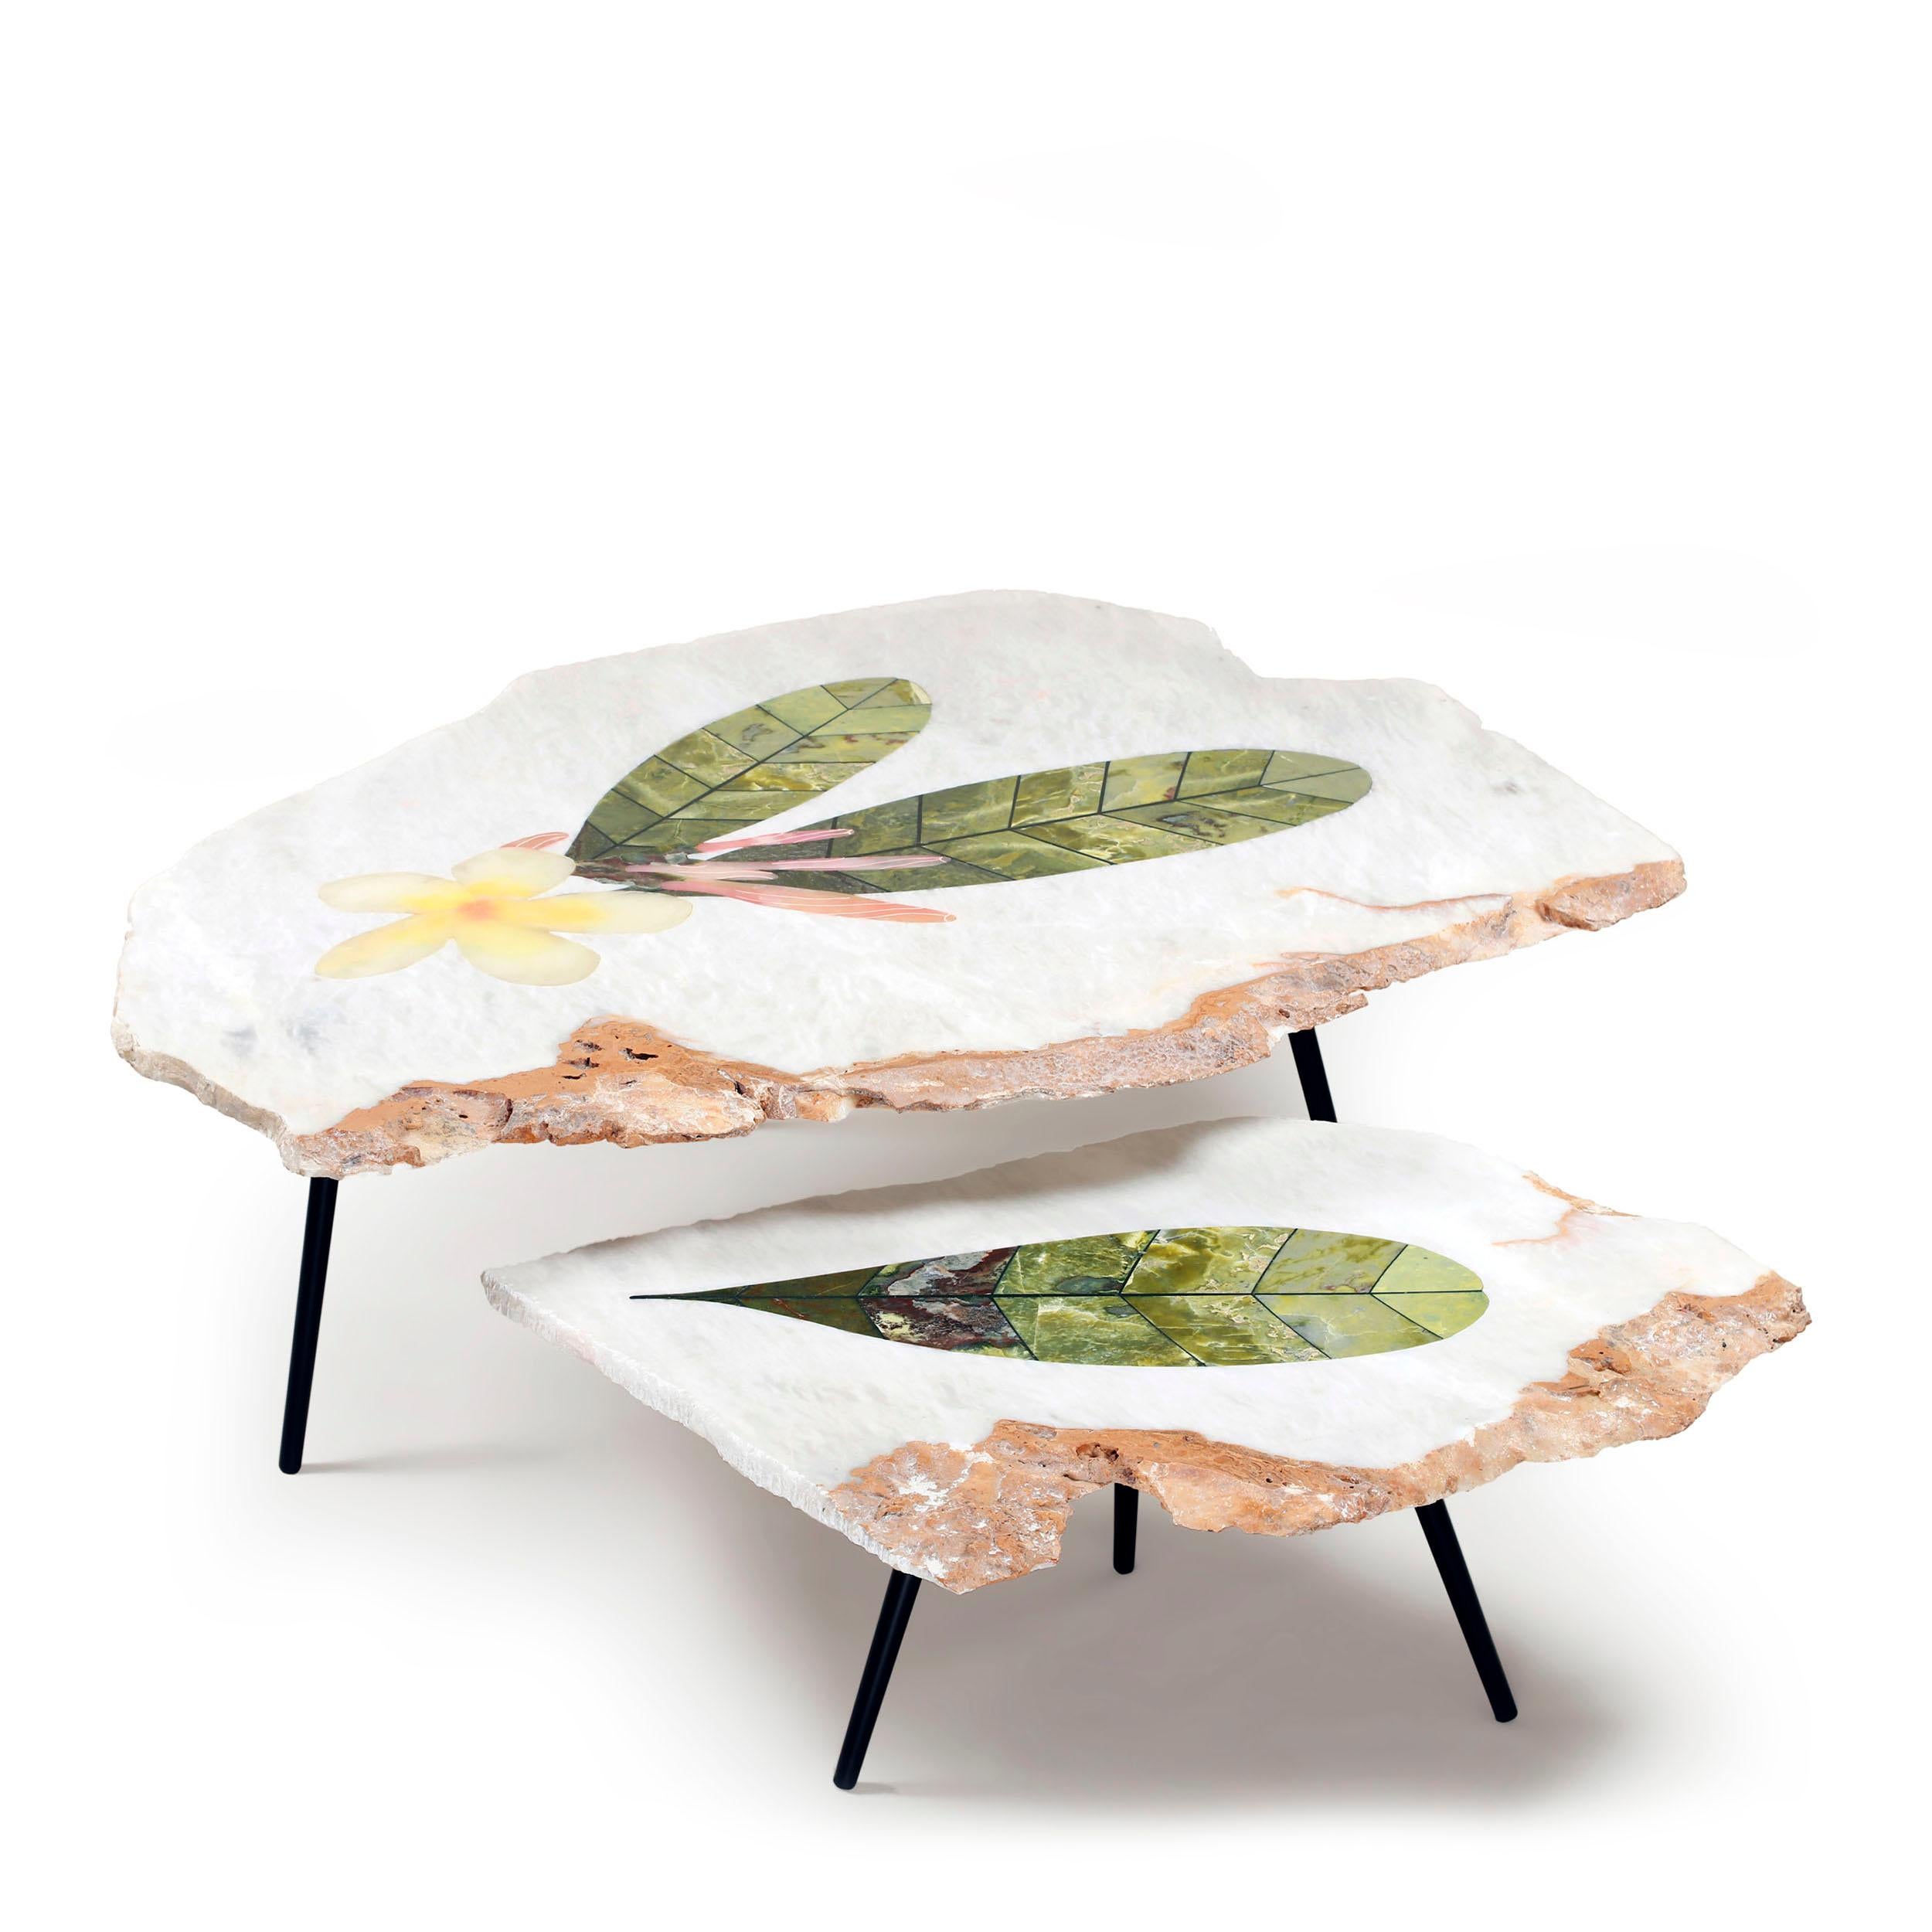 Champa nesting tables by Studio Lel
Dimensions: Large:D 122 x W 92 x H 41 cm; Small: D 76 x W 61 x H 33 cm
Materials: Serpentine, onyx, marble, metal.

These are handmade from semiprecious stone and marble in a small artisanal workshop. Please